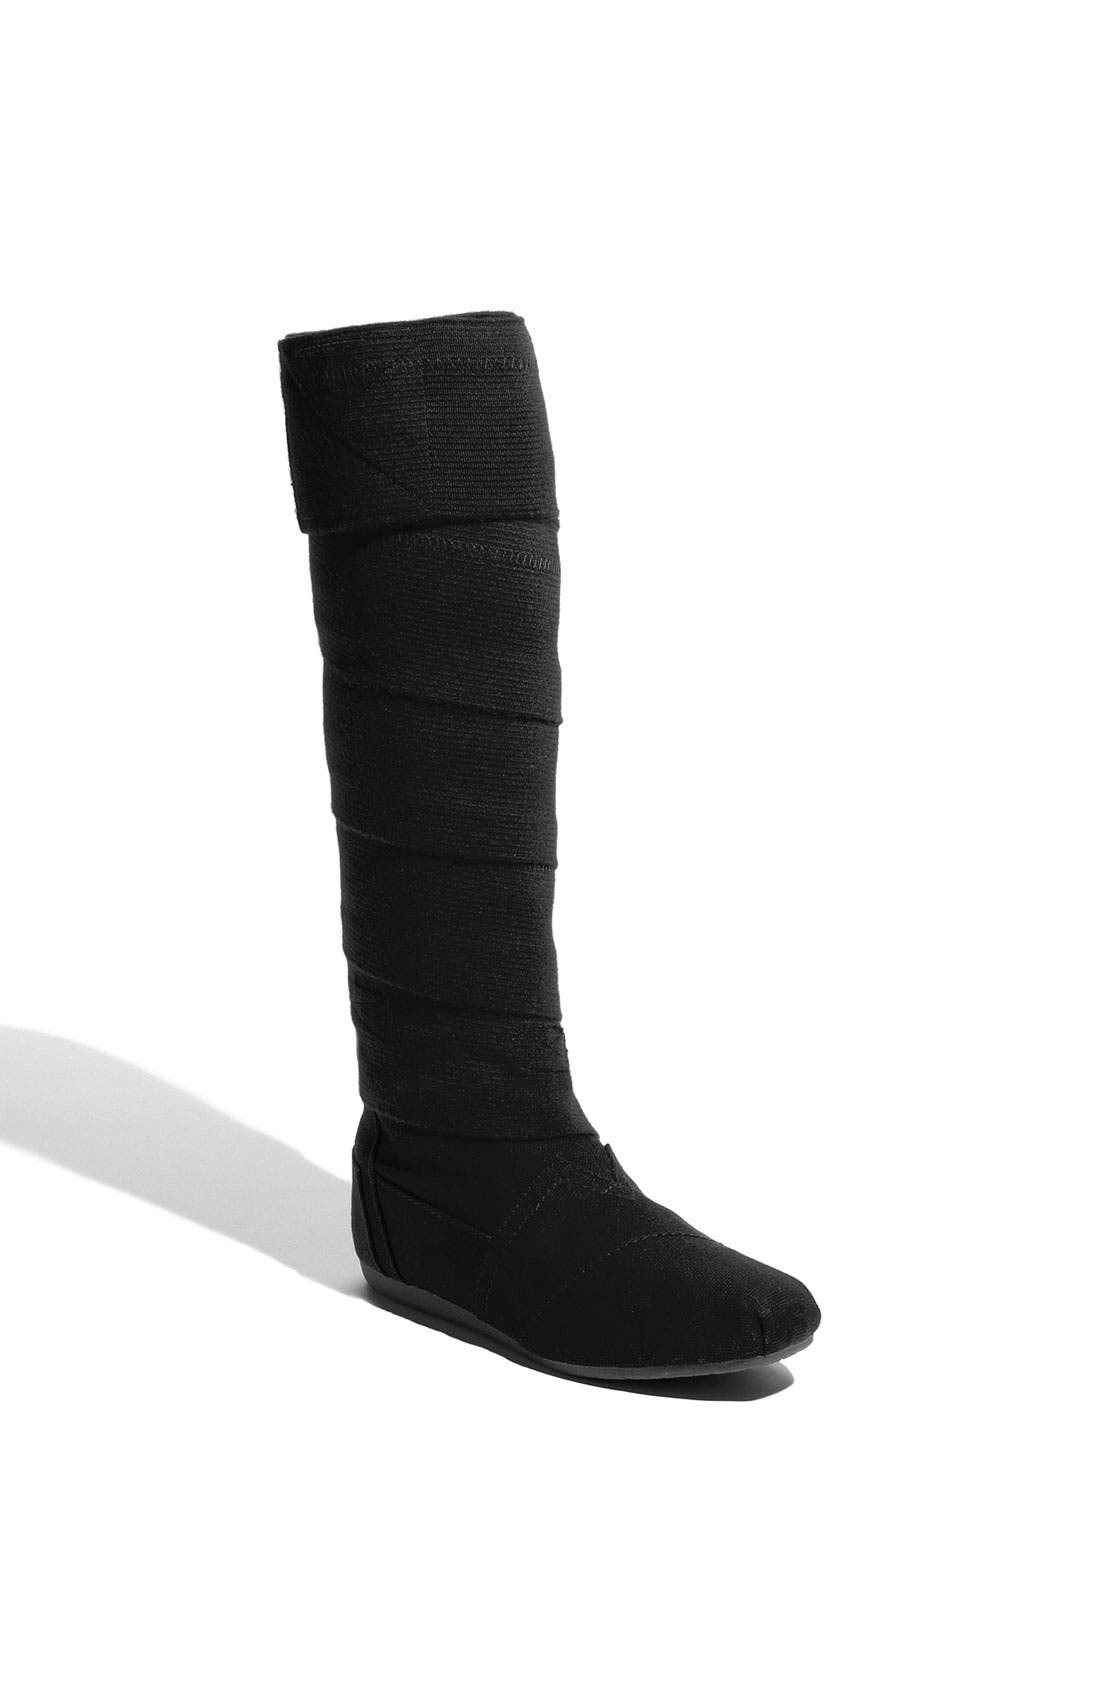 toms knee high boots